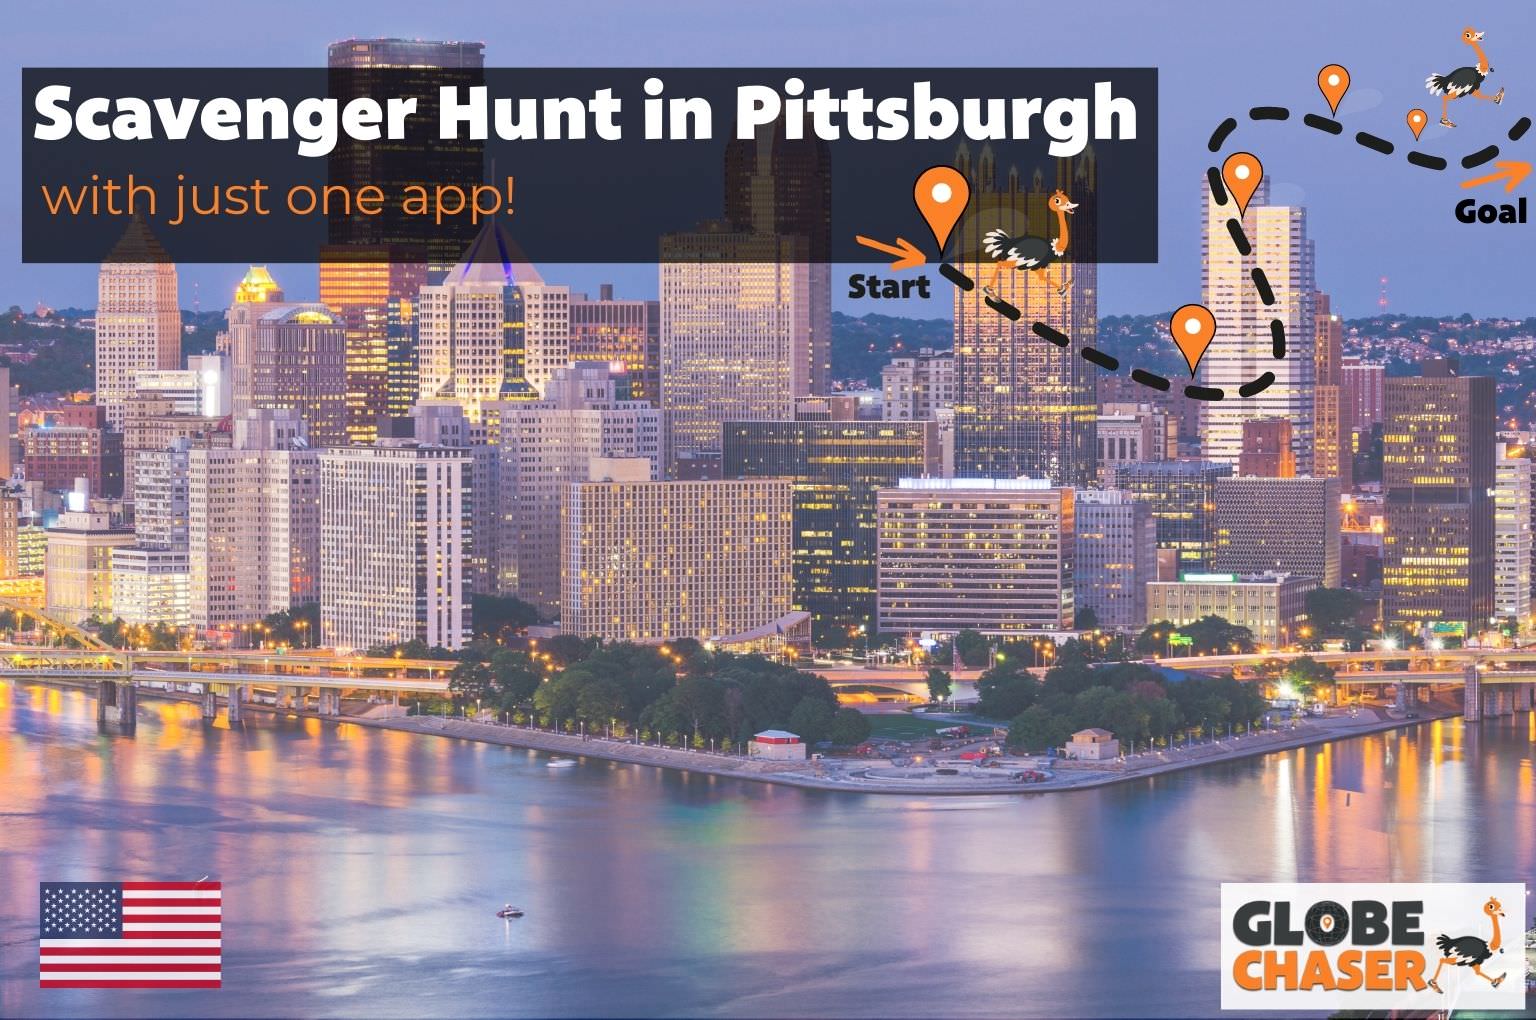 Scavenger Hunt in Pittsburgh, USA - Family Activities with the Globe Chaser App for Outdoor Fun